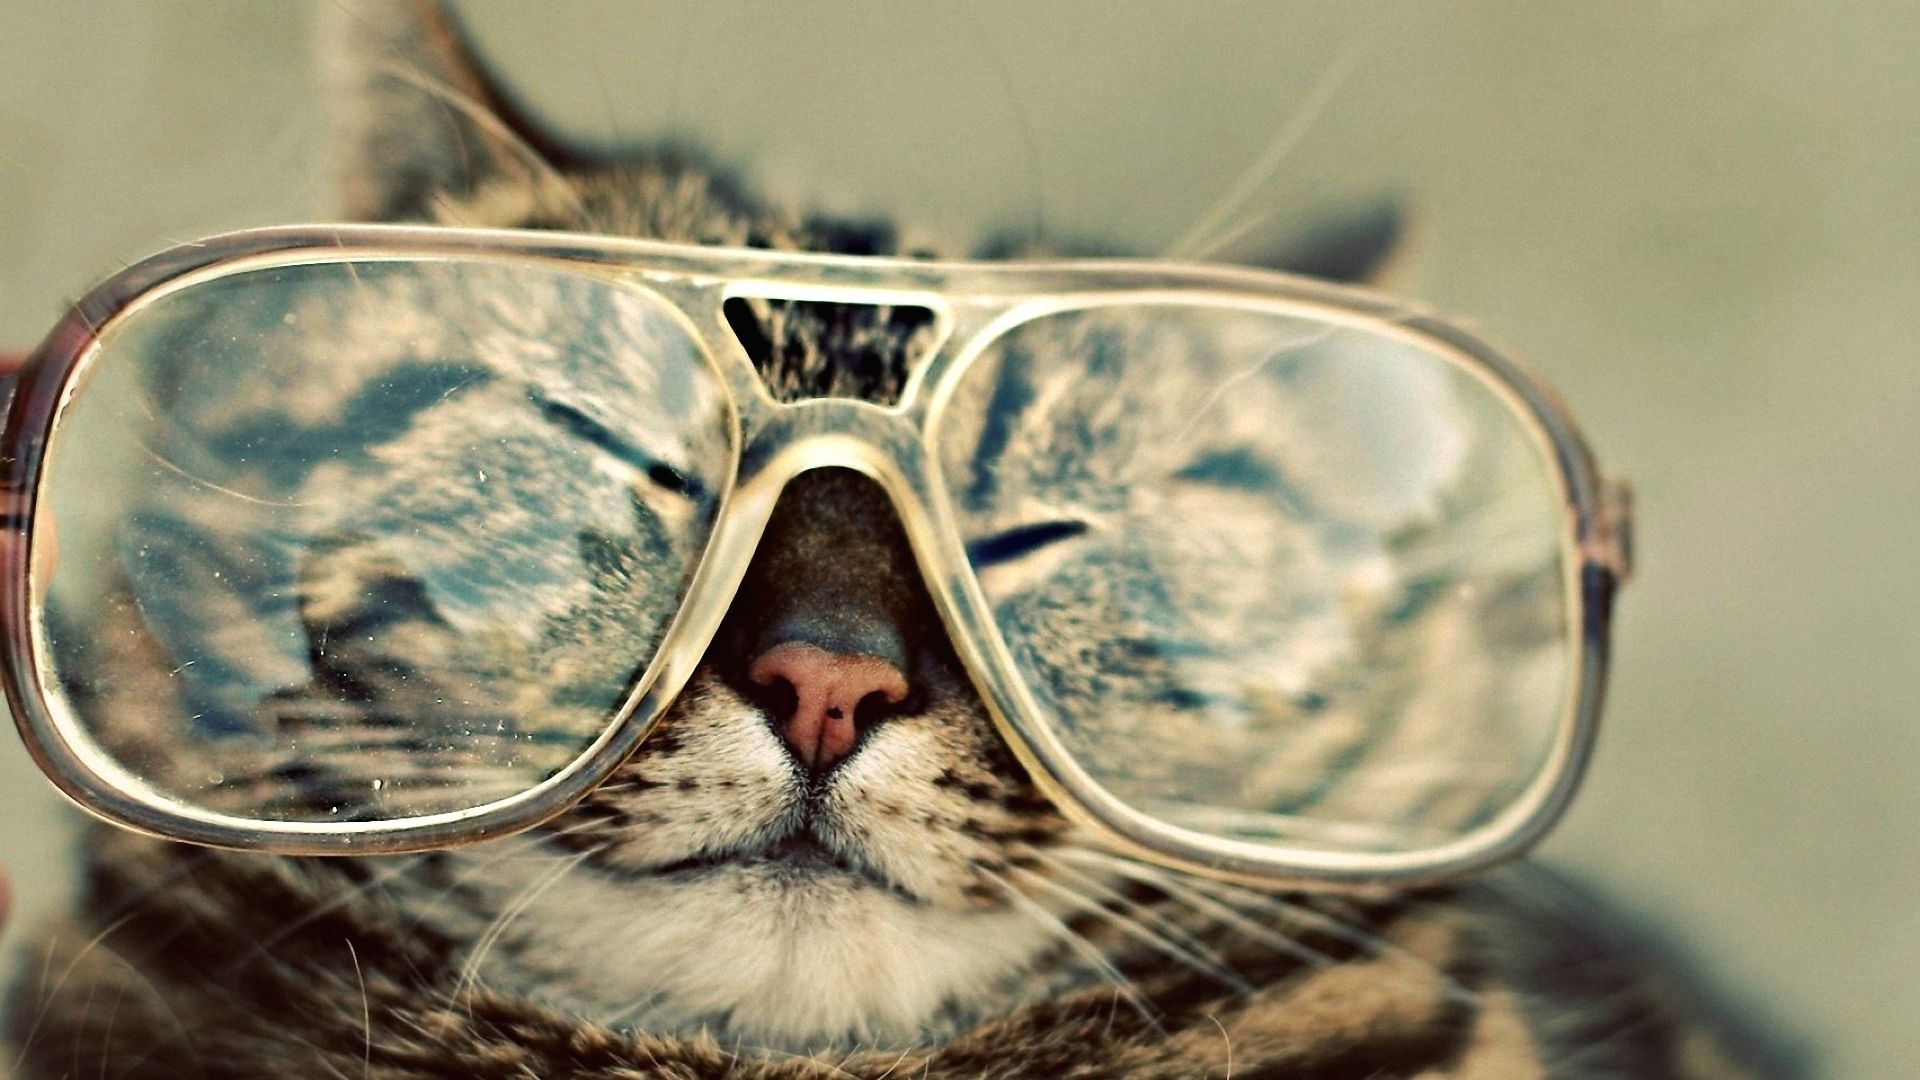 spectacles wallpaper,eyewear,sunglasses,glasses,whiskers,snout